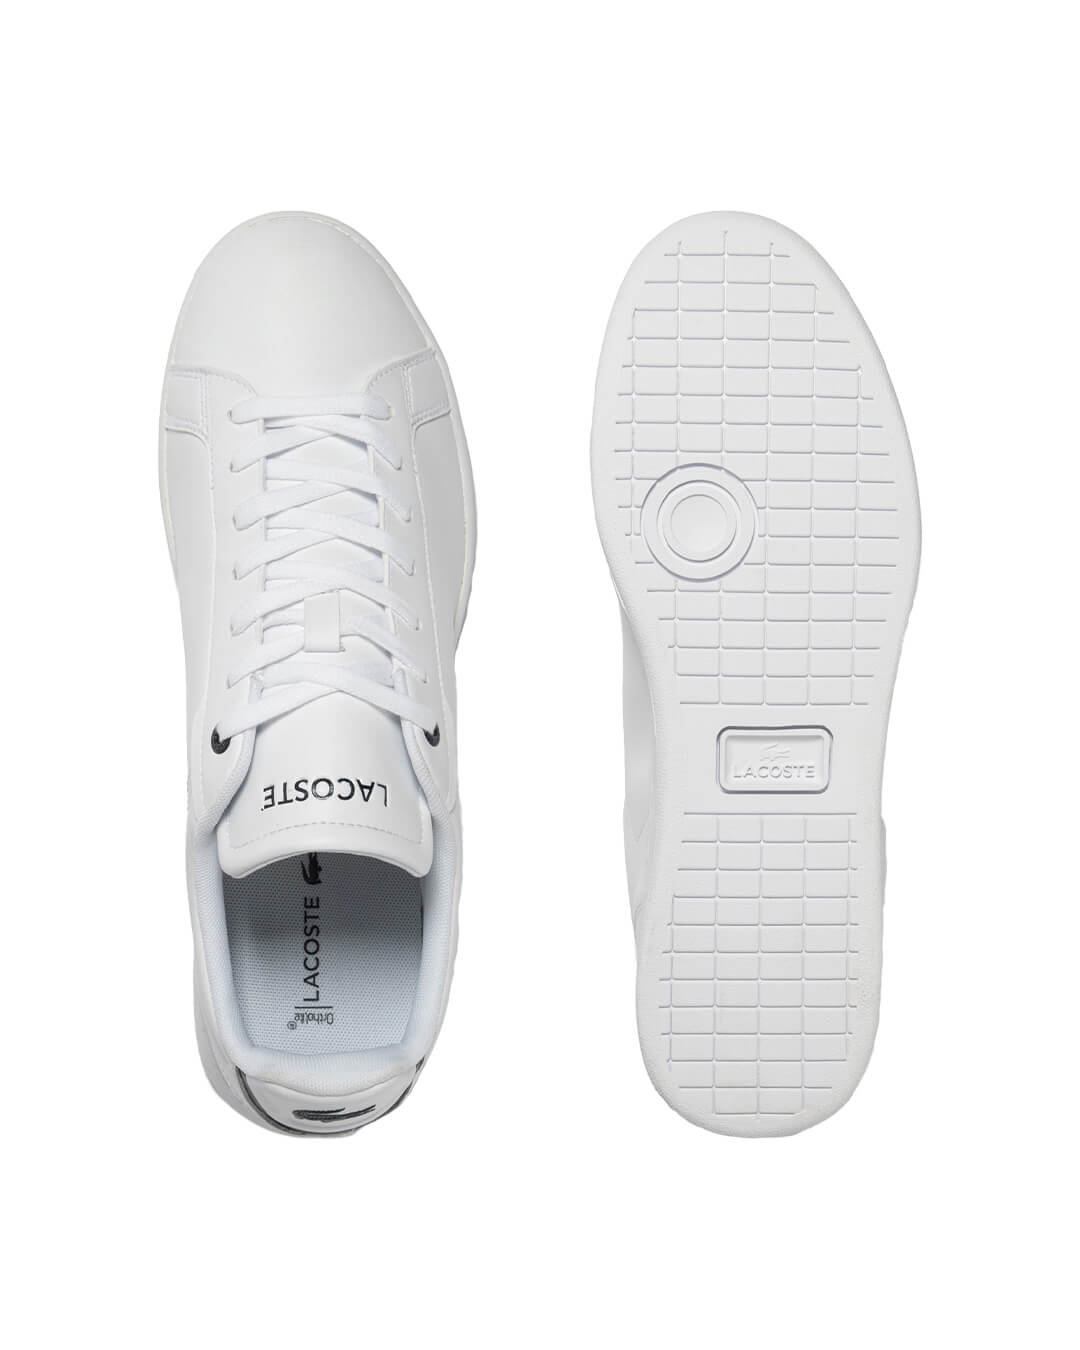 Lacoste Shoes Lacoste Carnaby Pro BL Leather White Tonal Sneakers